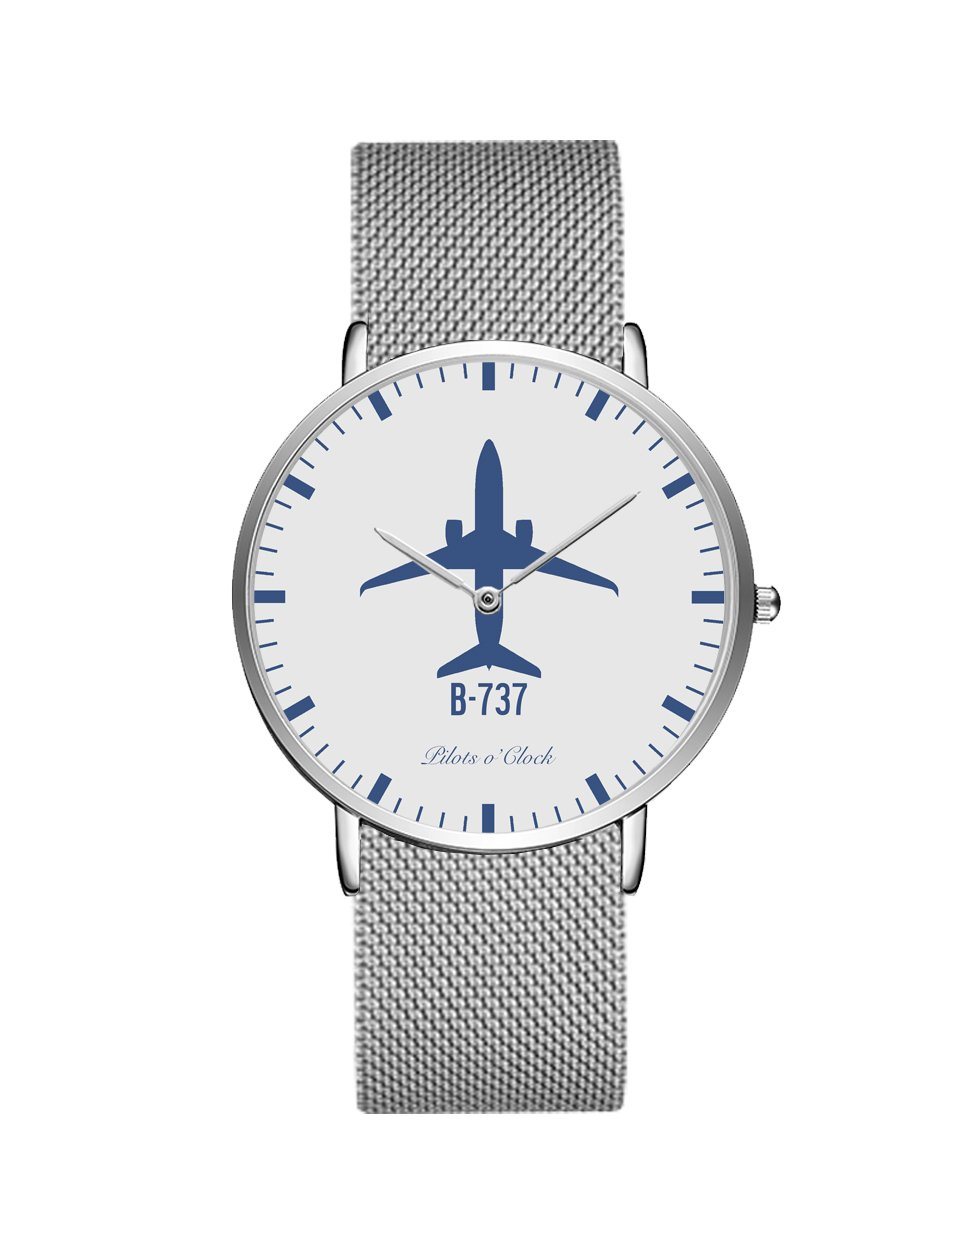 Boeing 737 Stainless Steel Strap Watches Pilot Eyes Store Silver & Silver Stainless Steel Strap 